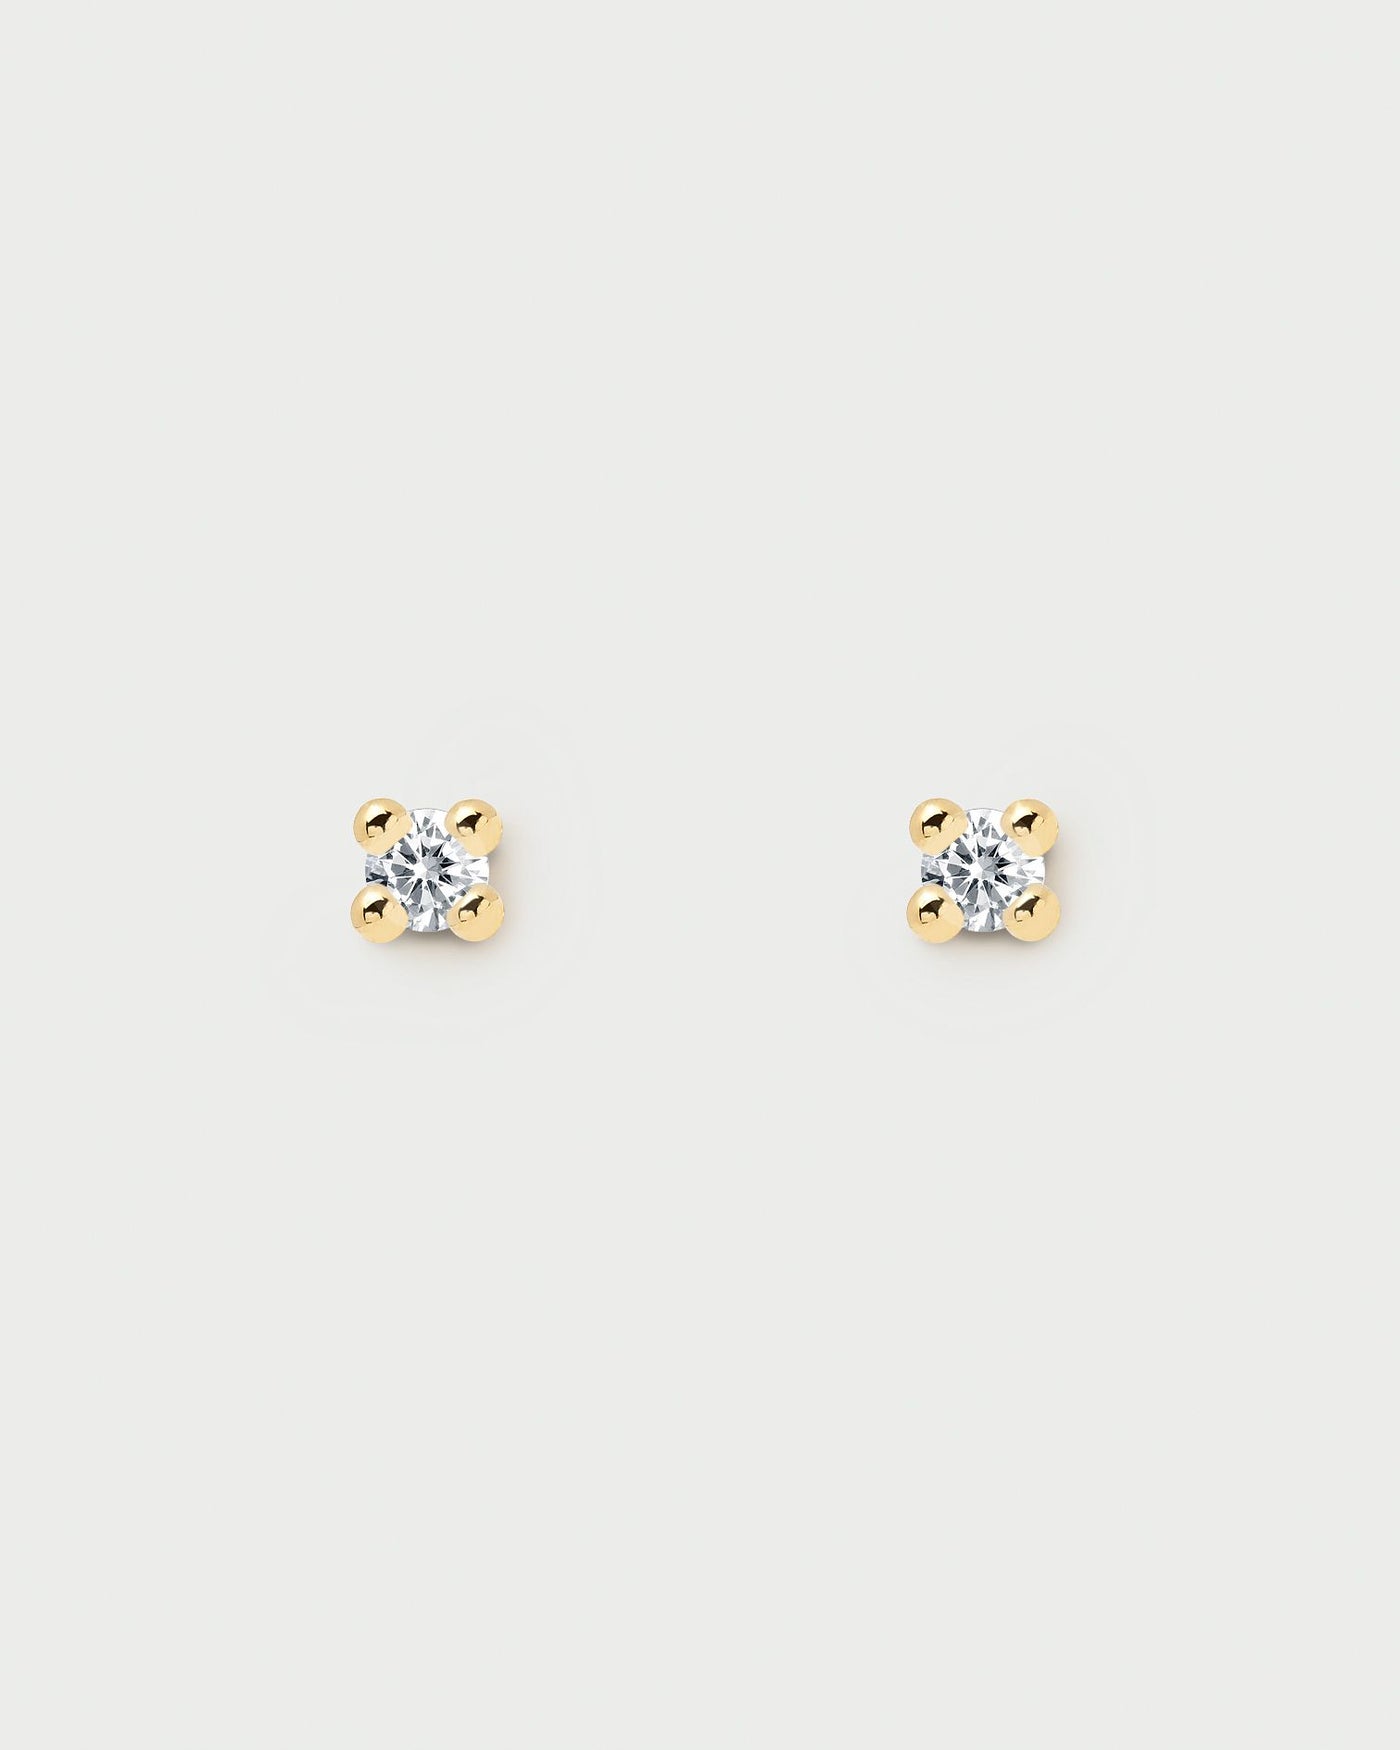 2024 Selection | Essentia Earrings. Pair of 18k gold plated silver stud earrings set with a white zirconia stone. Get the latest arrival from PDPAOLA. Place your order safely and get this Best Seller. Free Shipping.